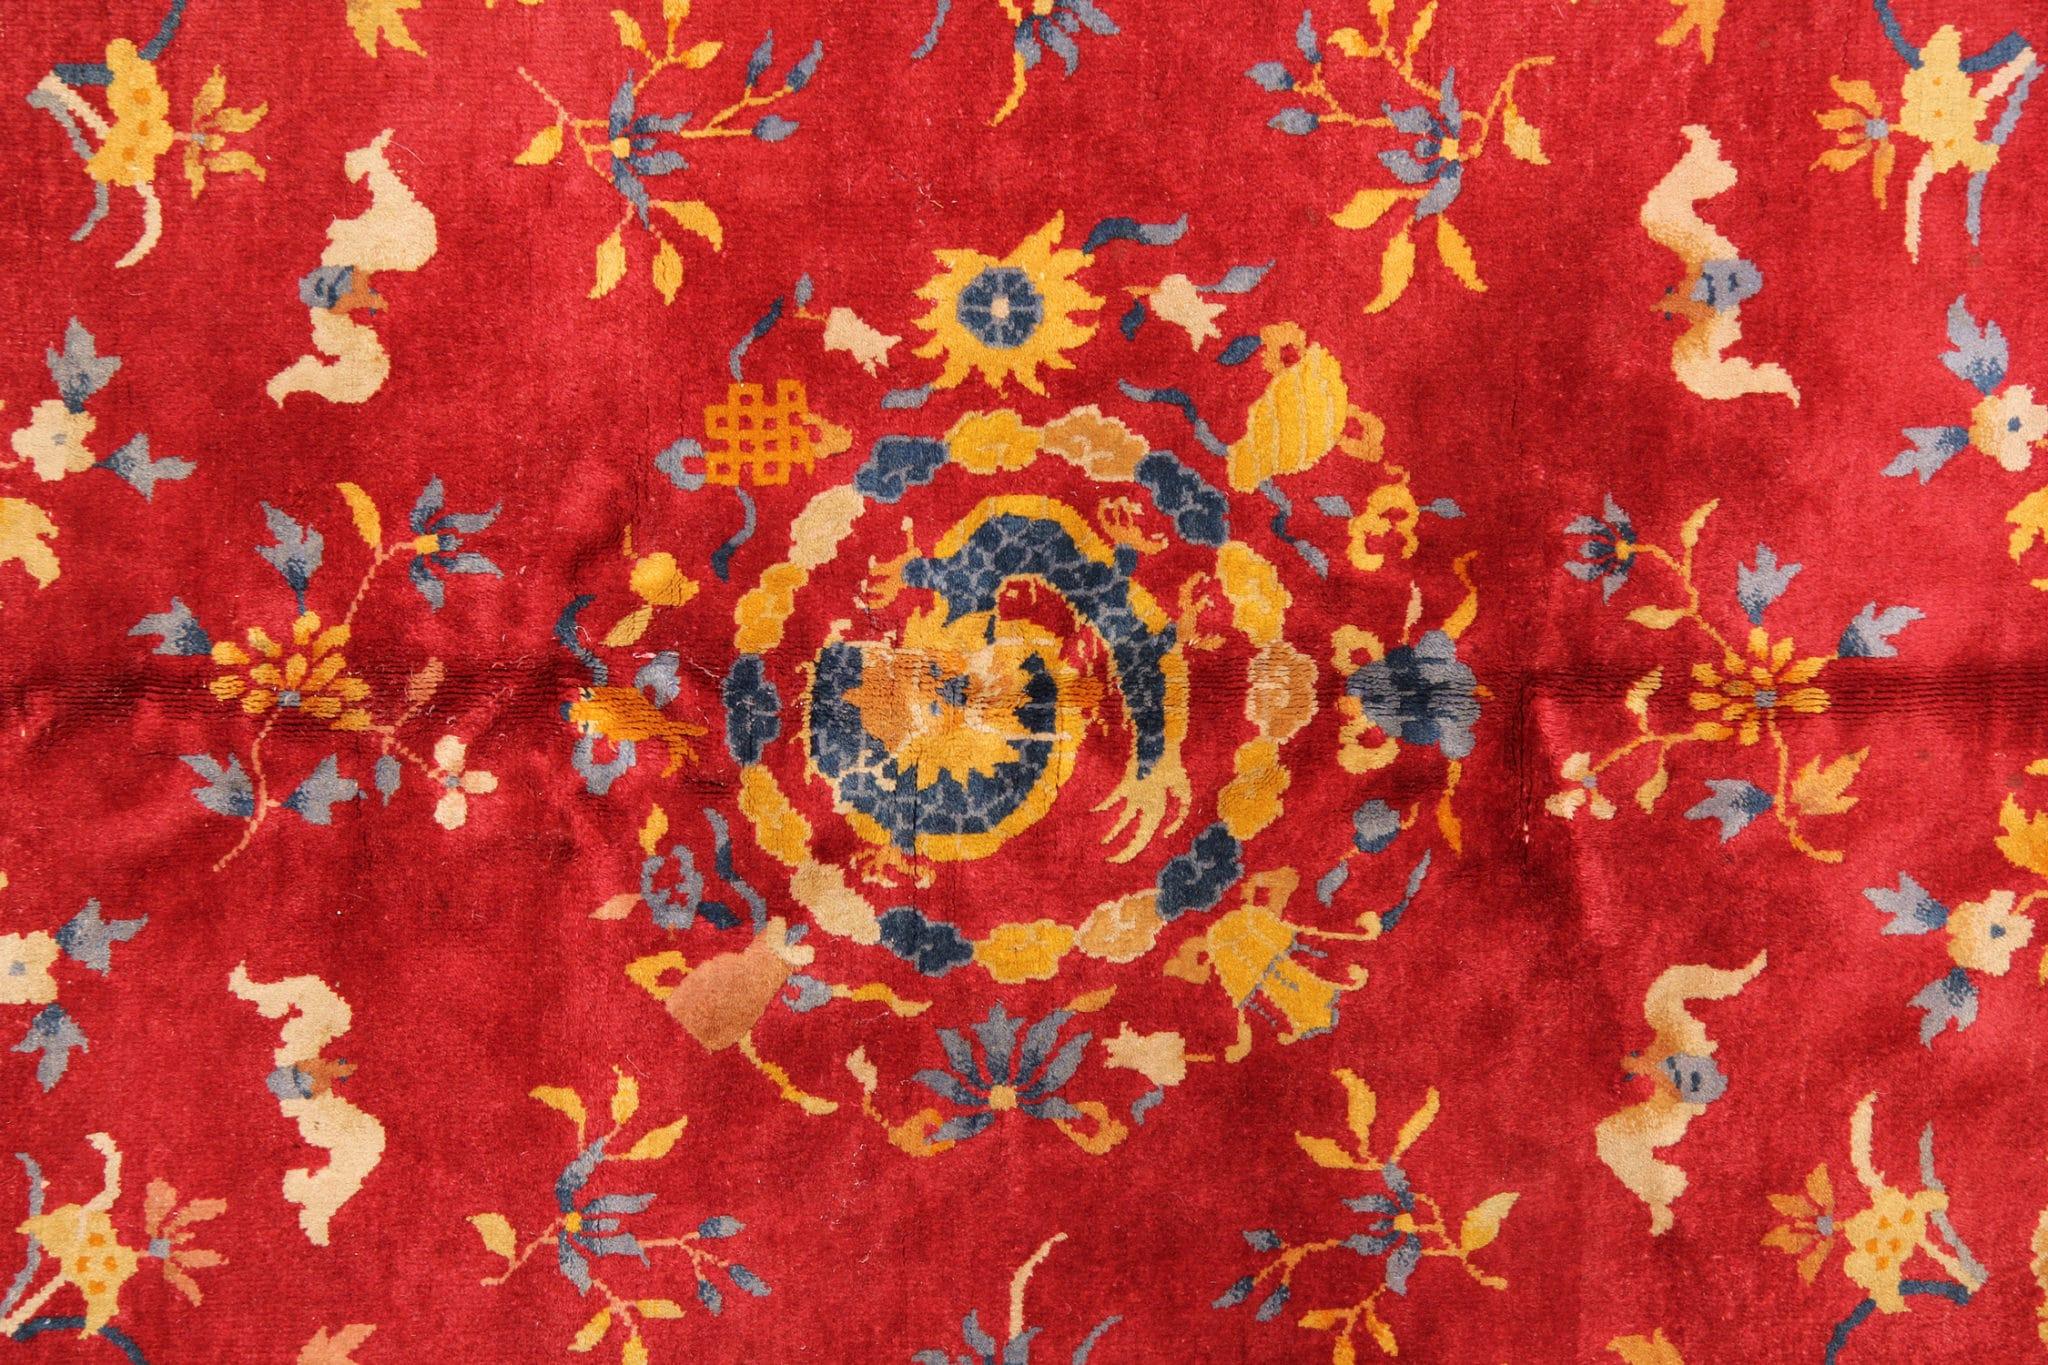 This exquisite red antique rug, a mesmerizing piece that whispers tales of the past with every intricate knot. Handcrafted in the 1890s in the heart of China, this masterpiece showcases the timeless beauty of traditional rugs. The rich hues of red